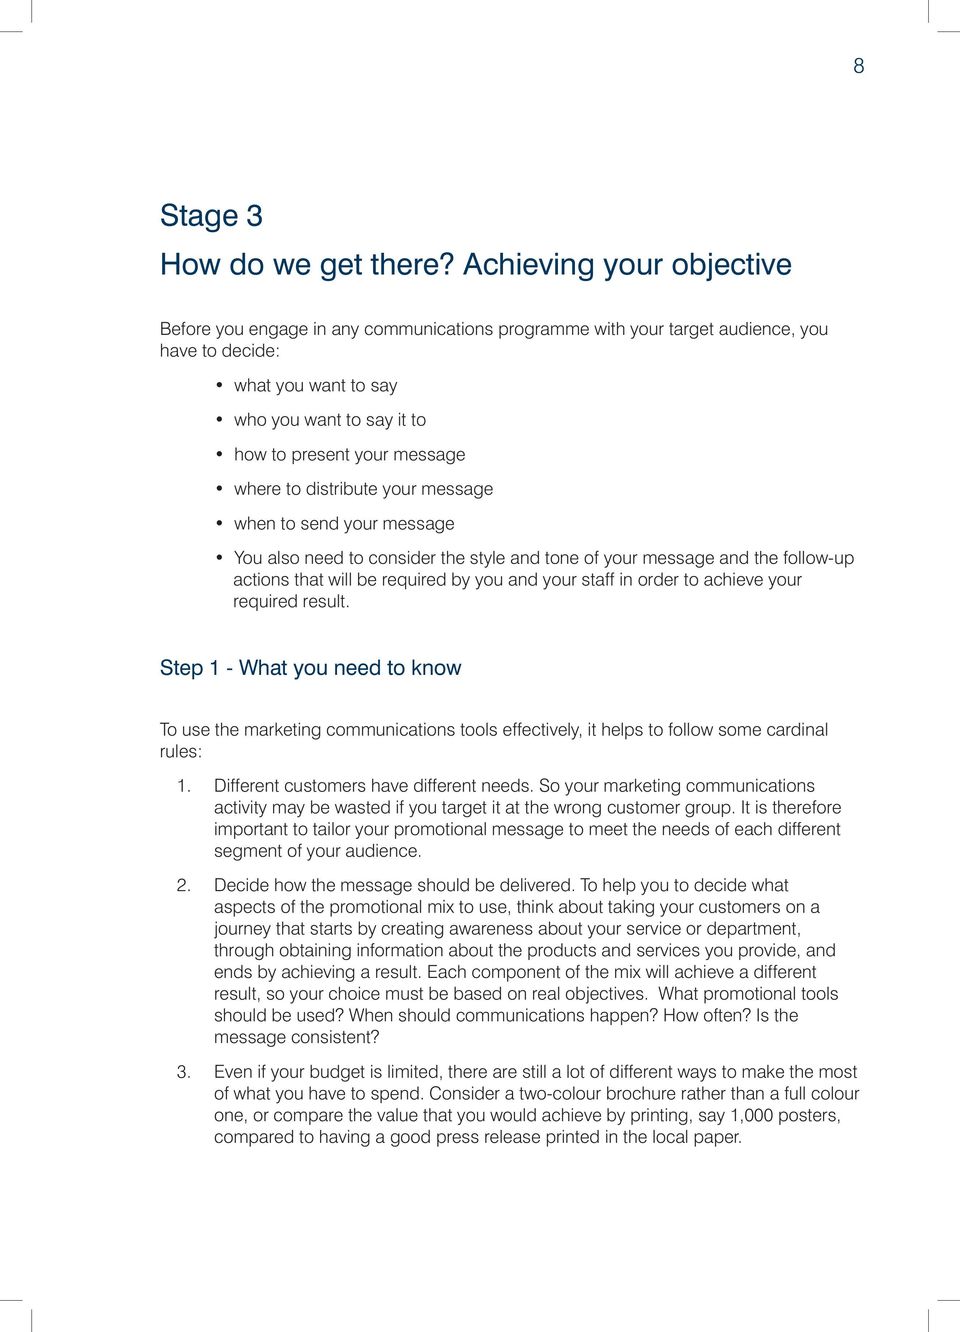 where to distribute your message when to send your message You also need to consider the style and tone of your message and the follow-up actions that will be required by you and your staff in order